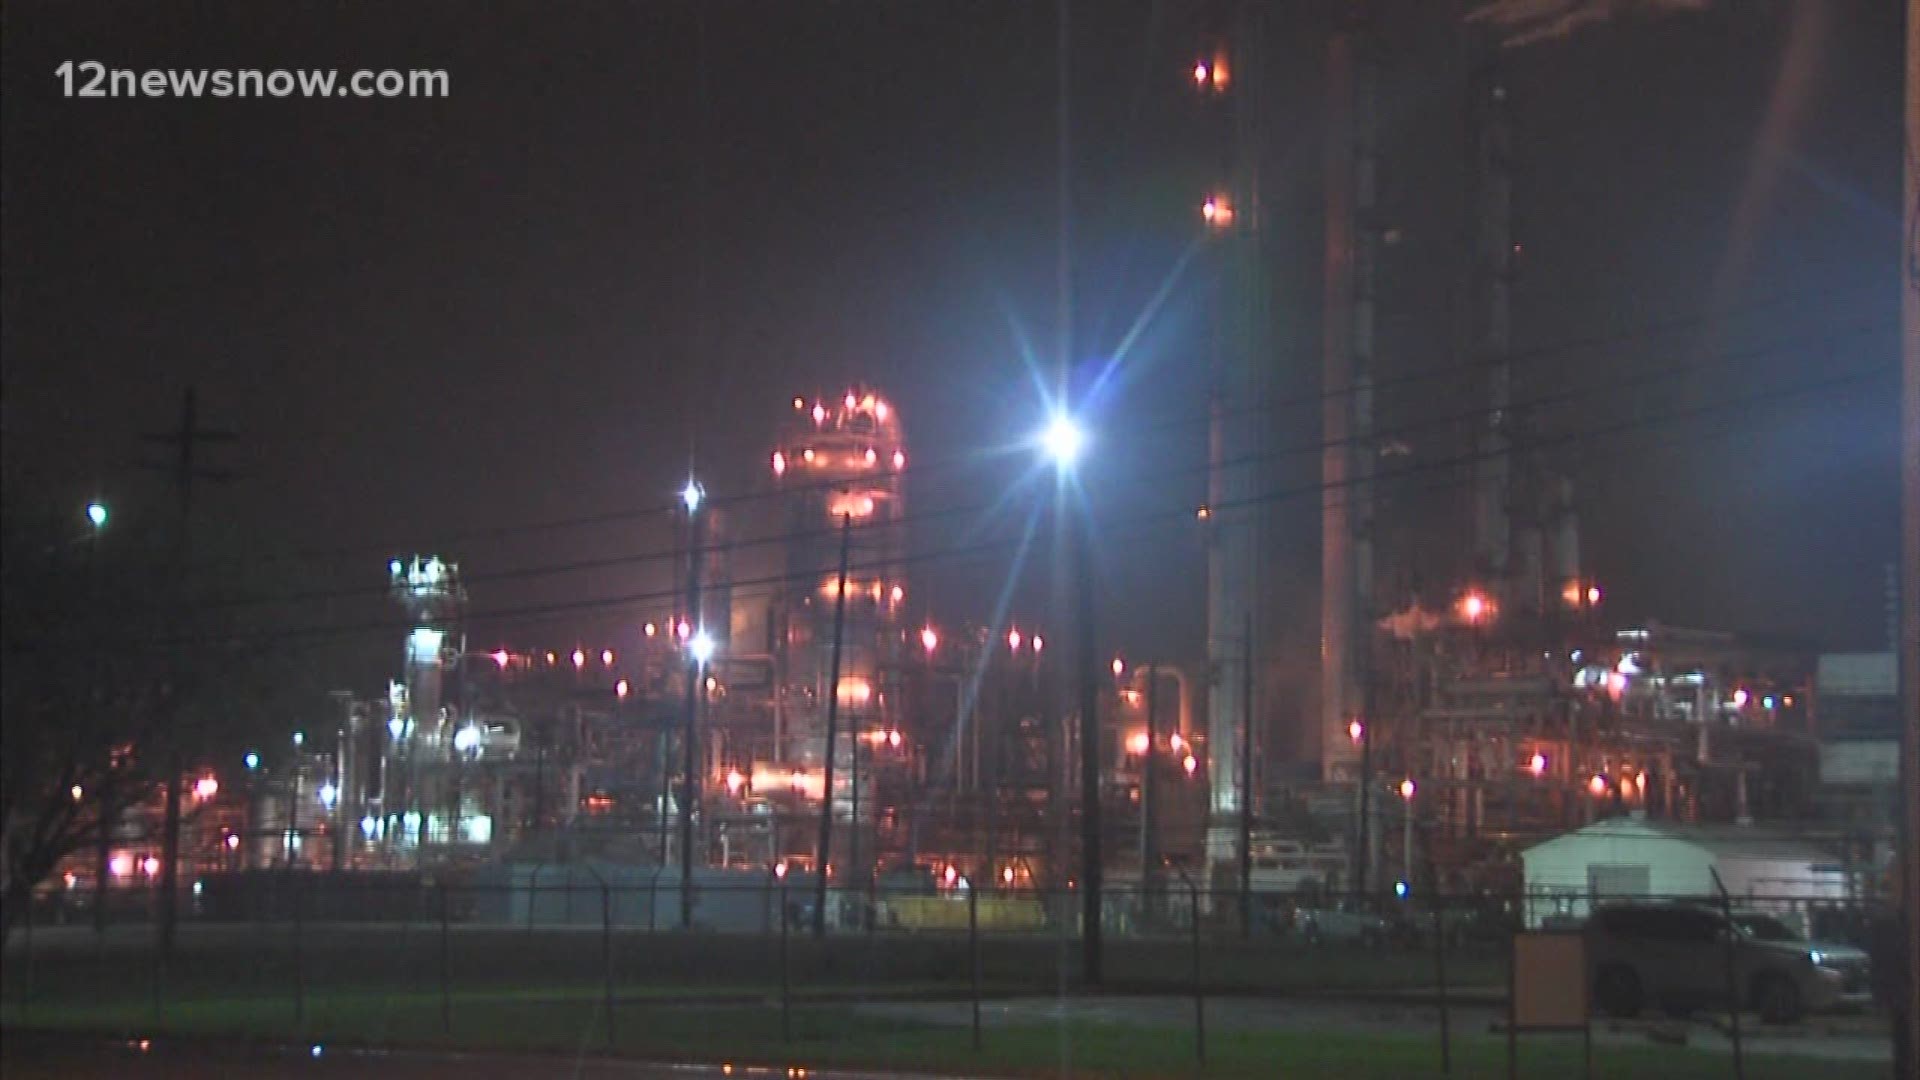 People in Port Neches reported hearing a boom and seeing black smoke rise from the facility